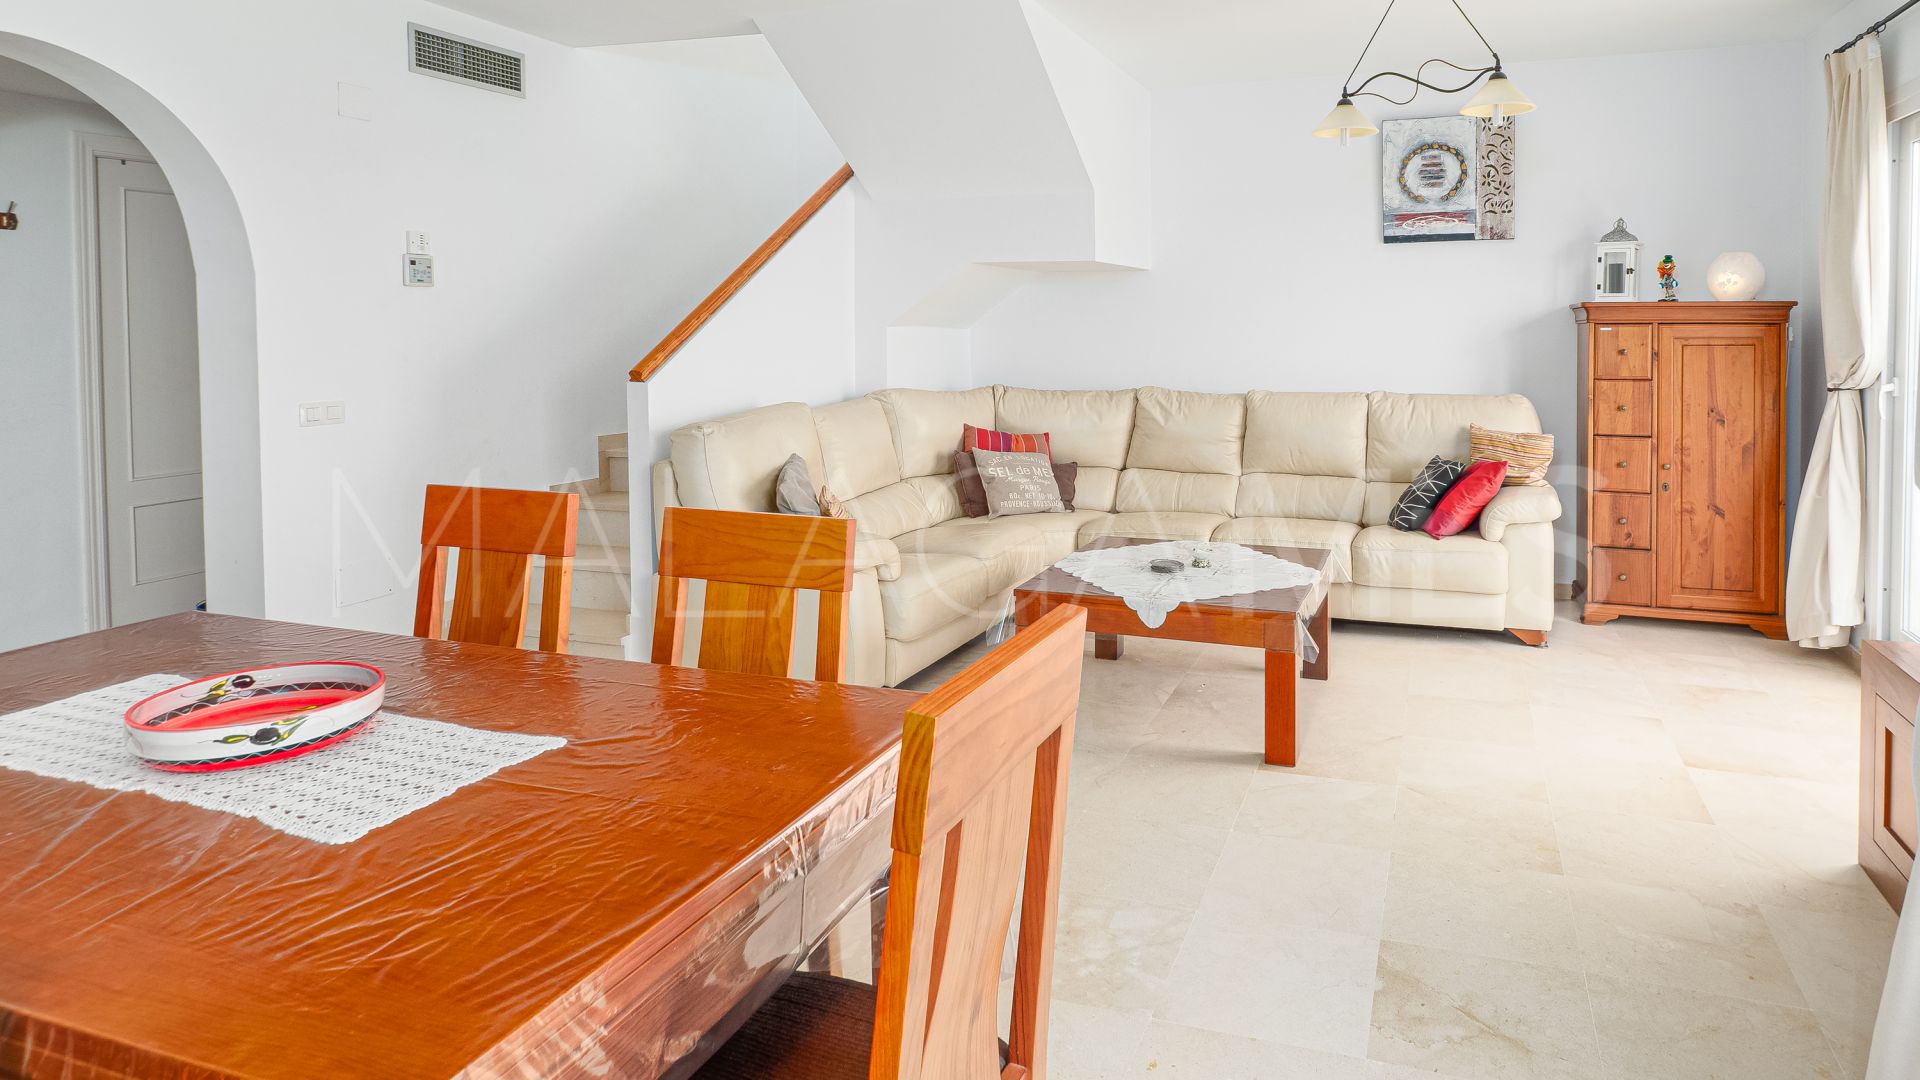 For sale duplex in Casares with 3 bedrooms